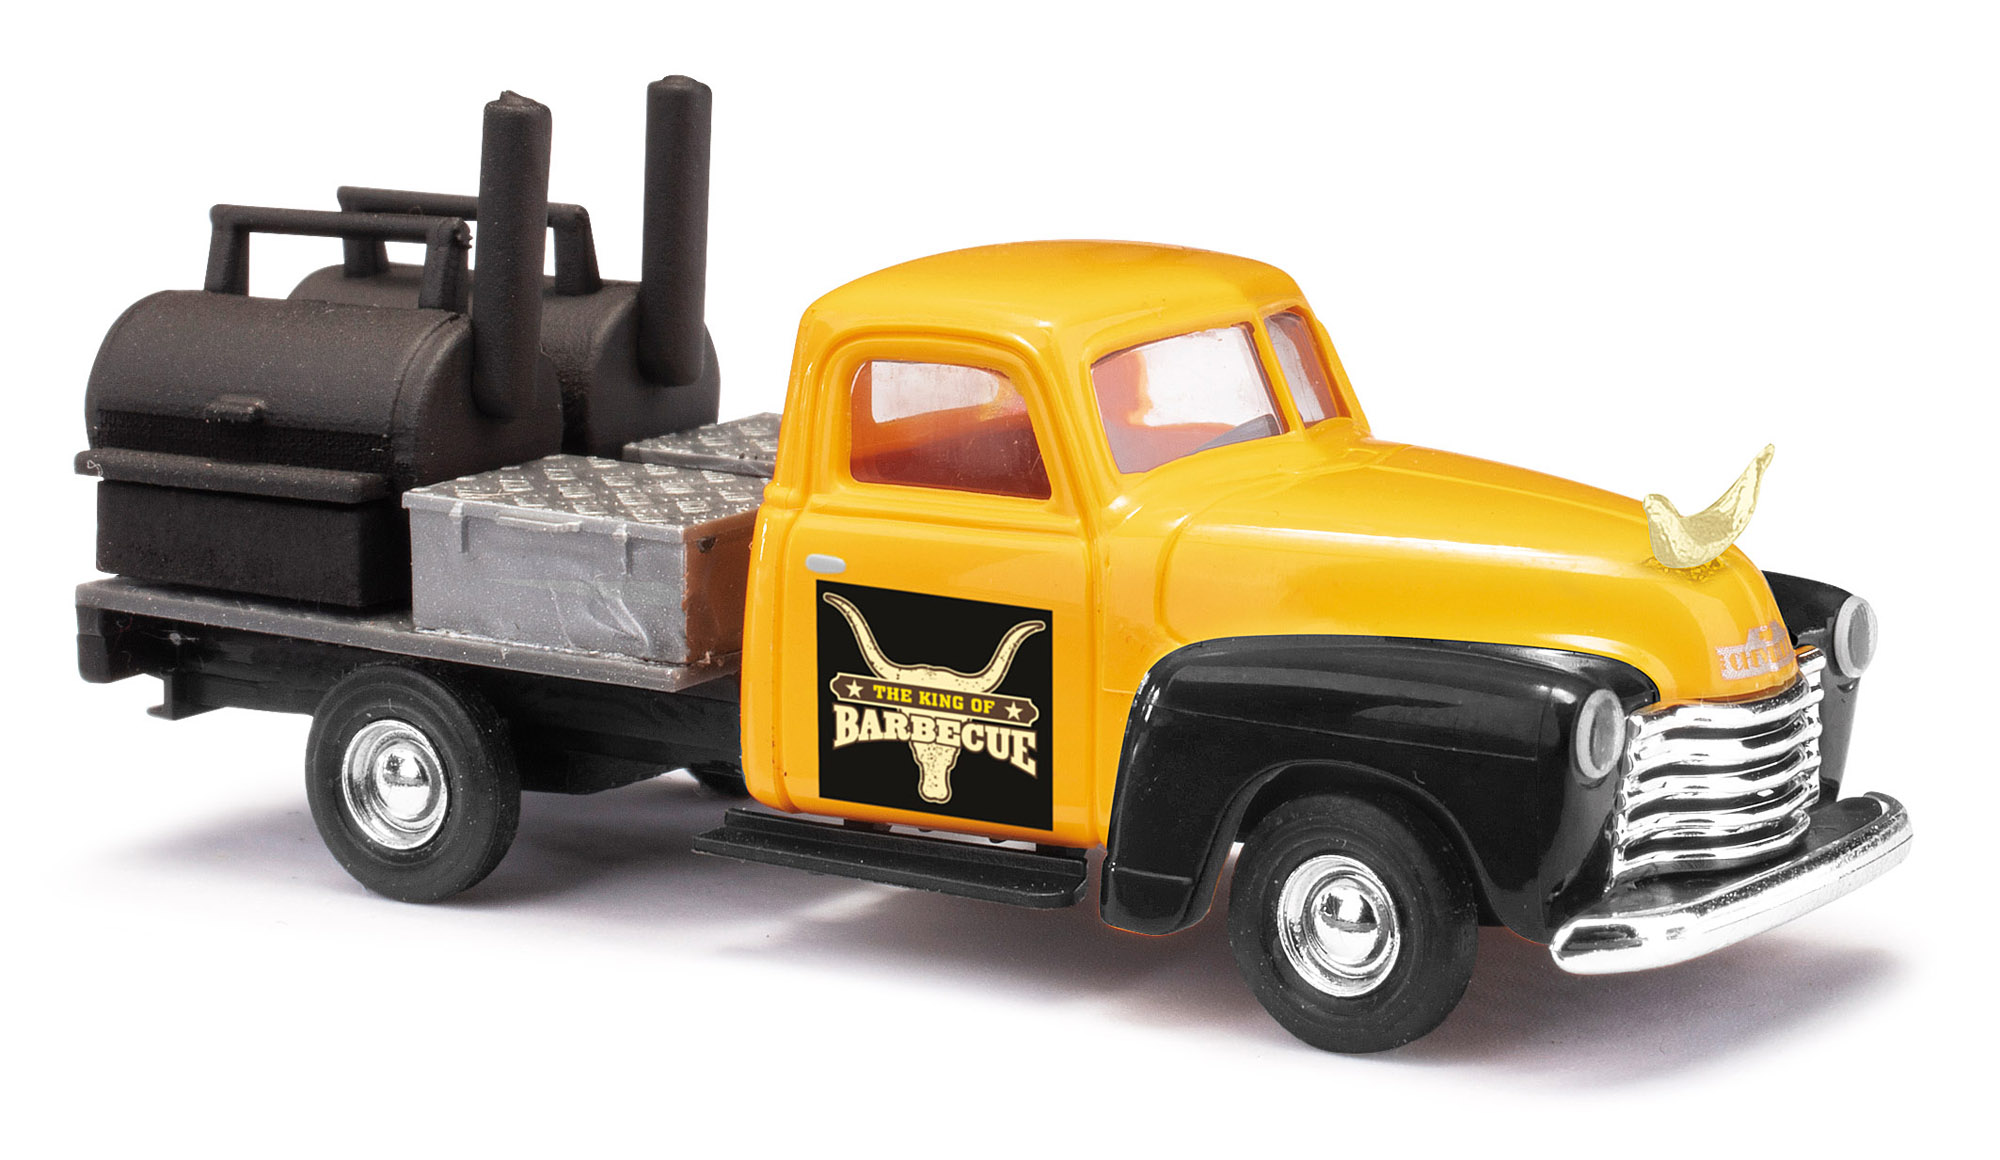 48239-Chevrolet Pick-up, Barbecue-4001738482393